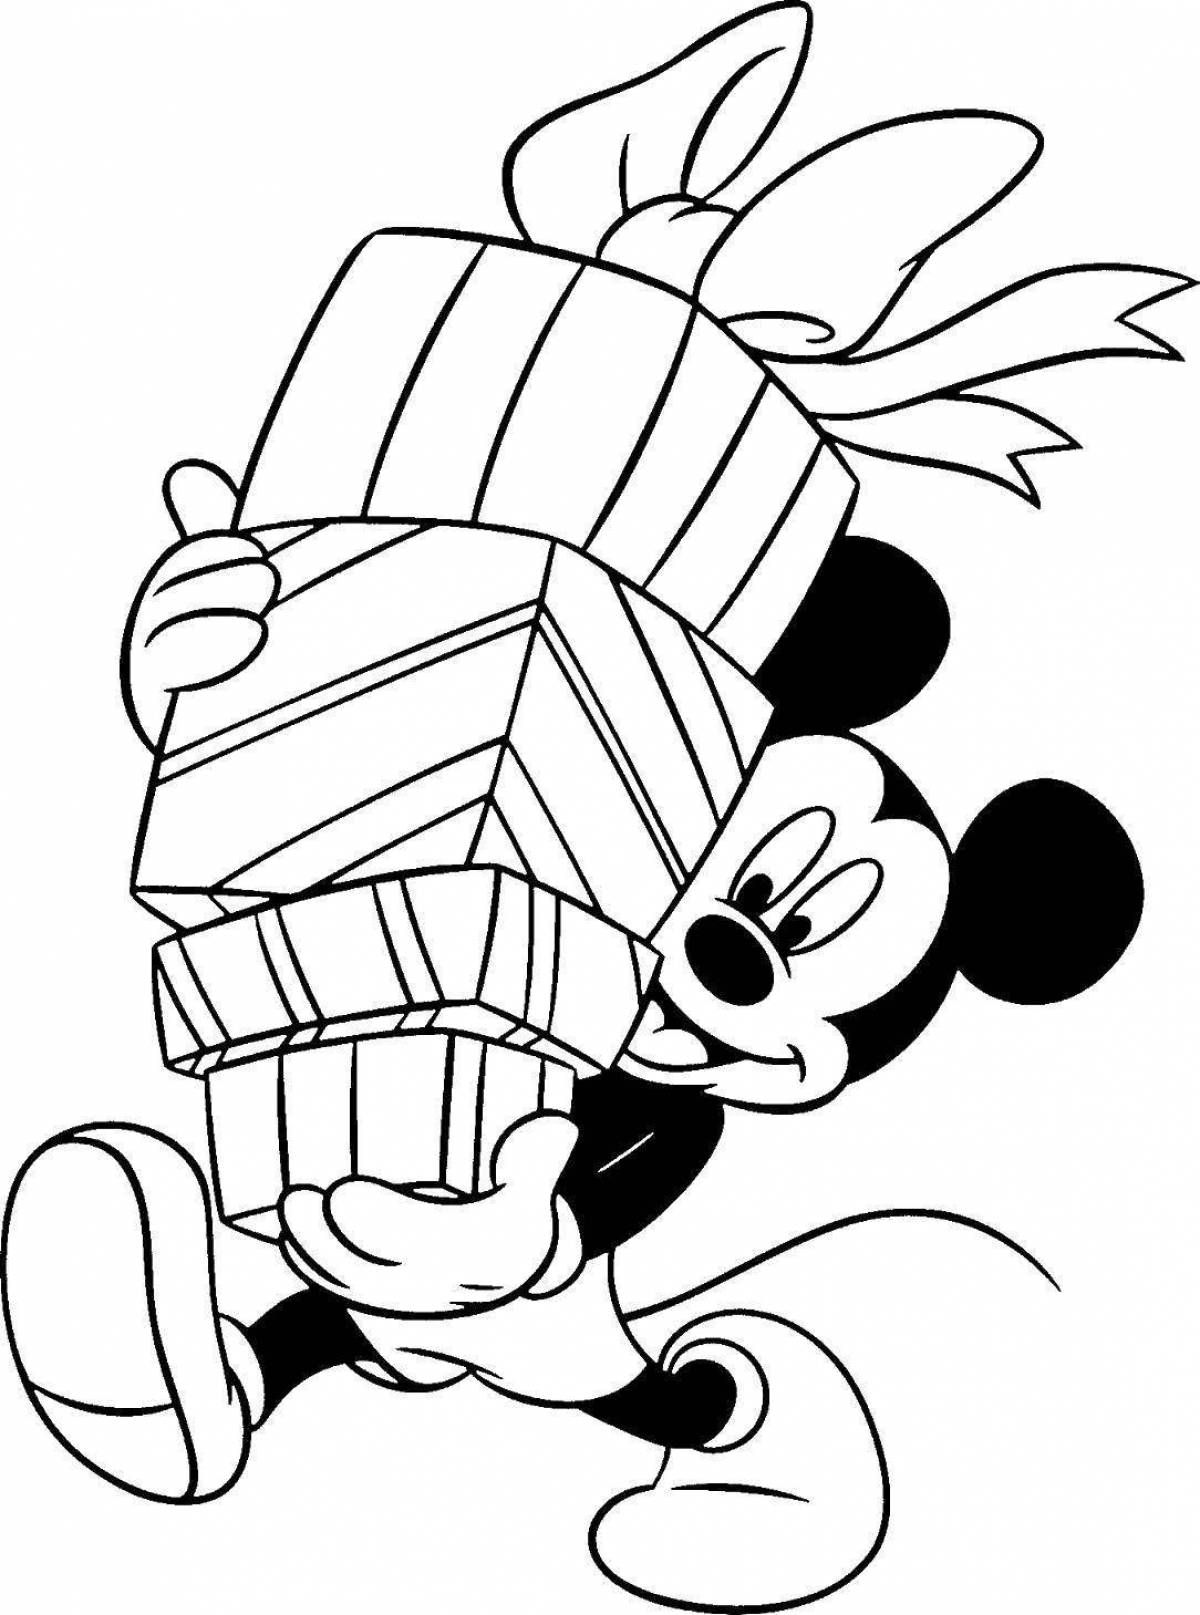 Mickey Mouse bright Christmas coloring book